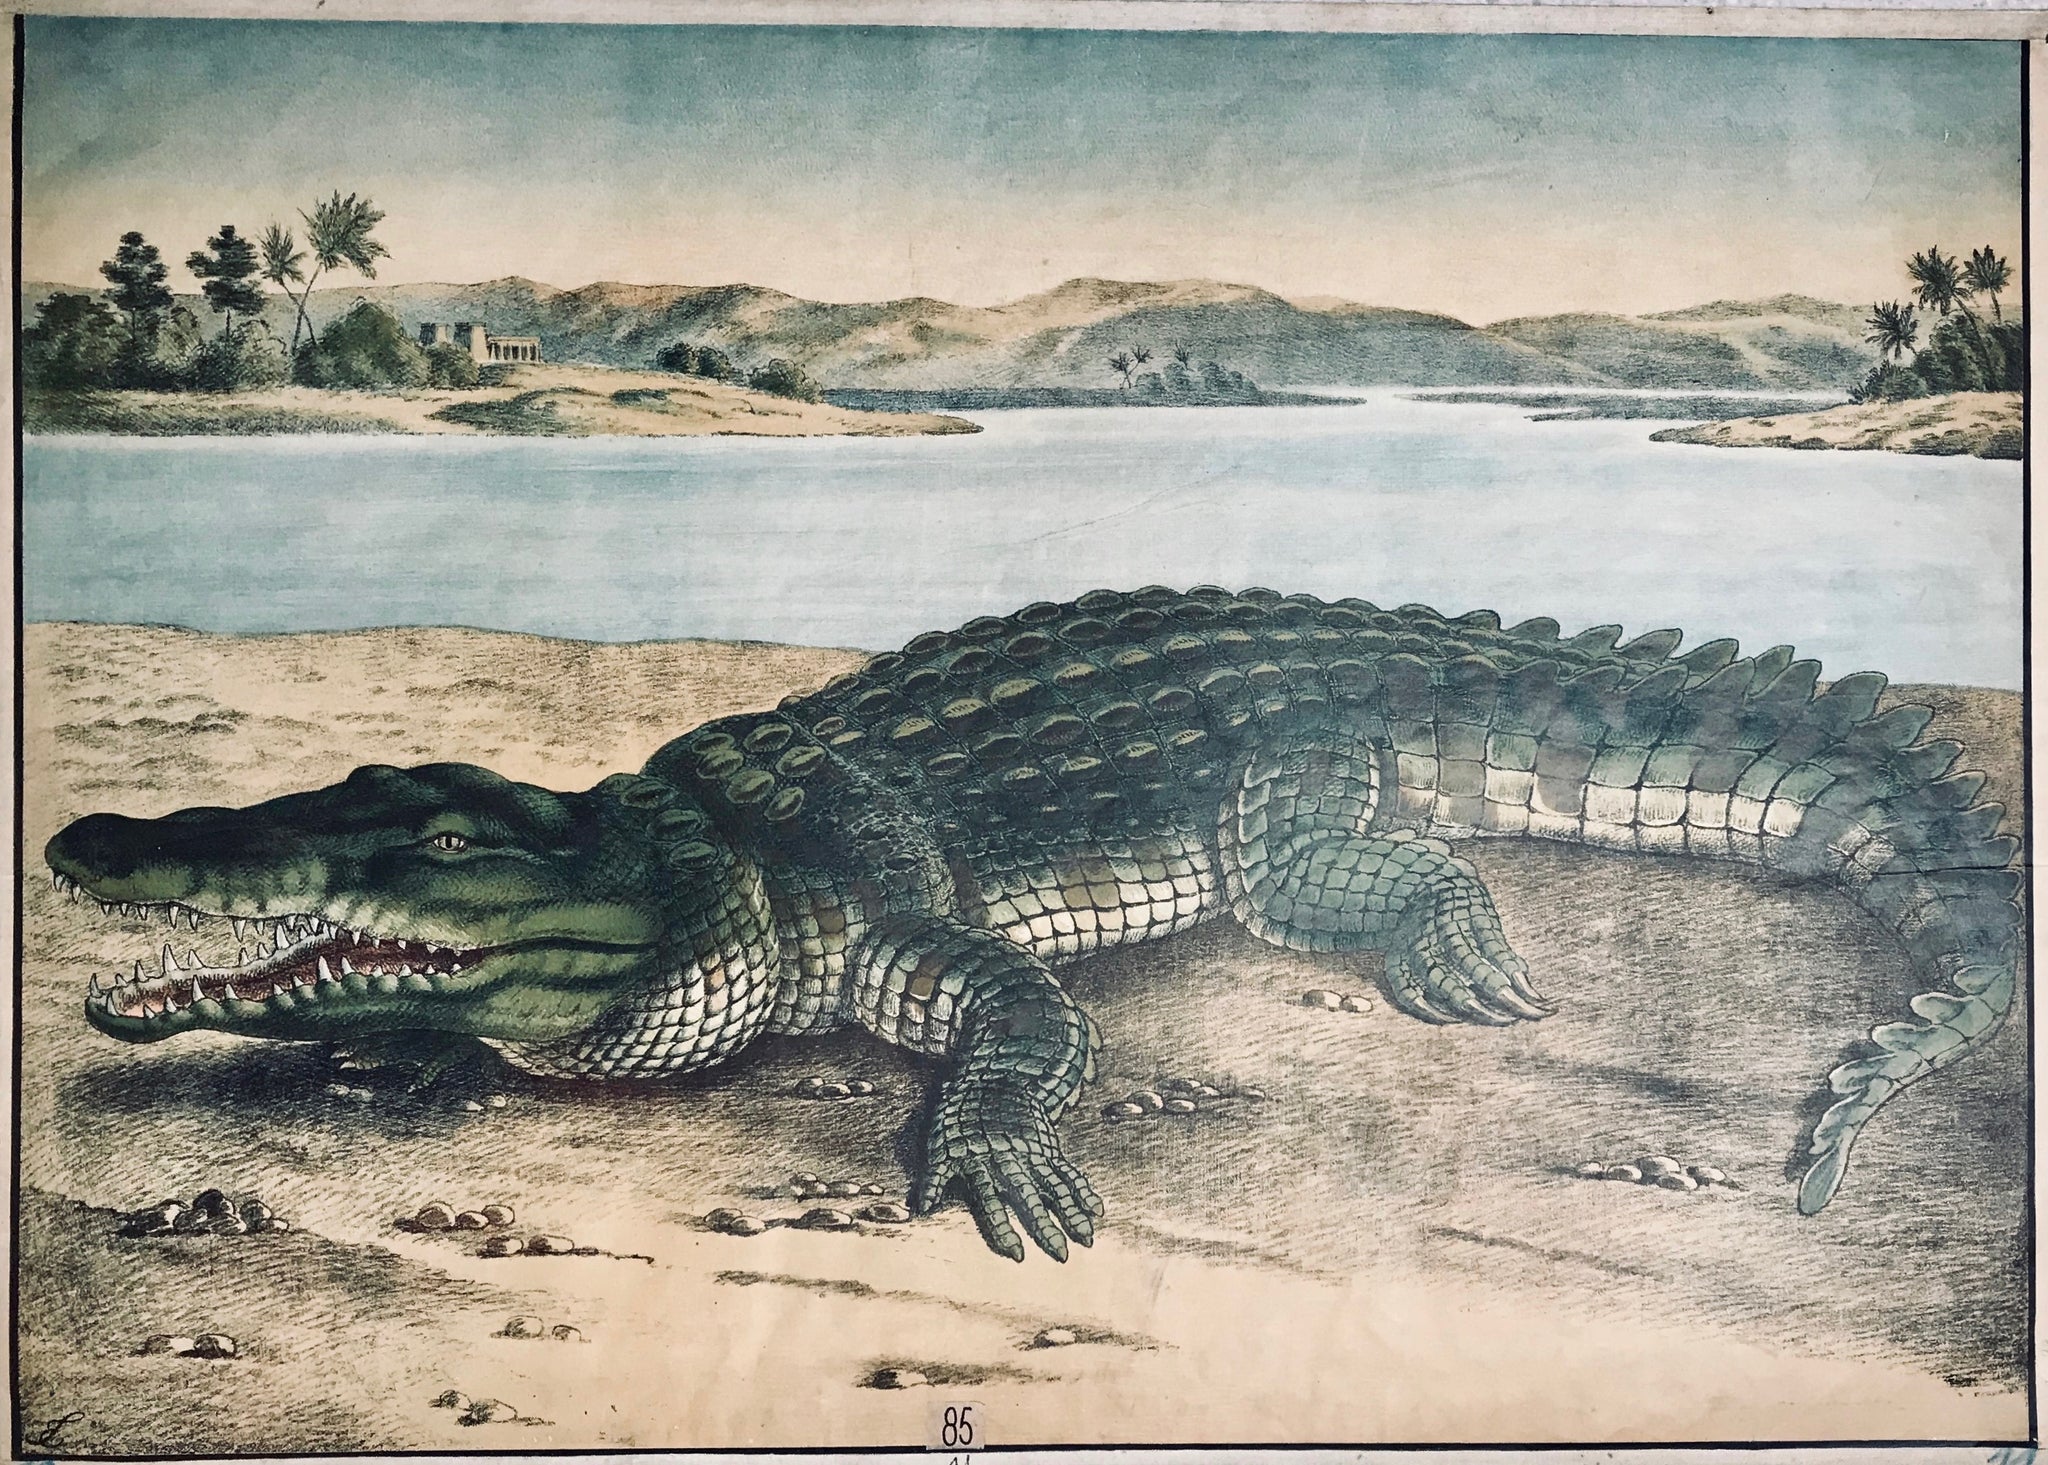 Title on reverse side: "Krokodil". Crocodile.  Chromolithograph by Meinhold. Dresden. Ca. 1890. Monogrammed in lower left corner: entwined letters ES or SE.  This Imperial Folio lithograph of a crocodile was printed in color and used as a wall chart in schools. It is hemmed with a linen cloth border. One visible but hardly disturbing fold across upper jaw. A tiny bit knittered here and there as to be expected for an extra large print of nearly 120 years of age